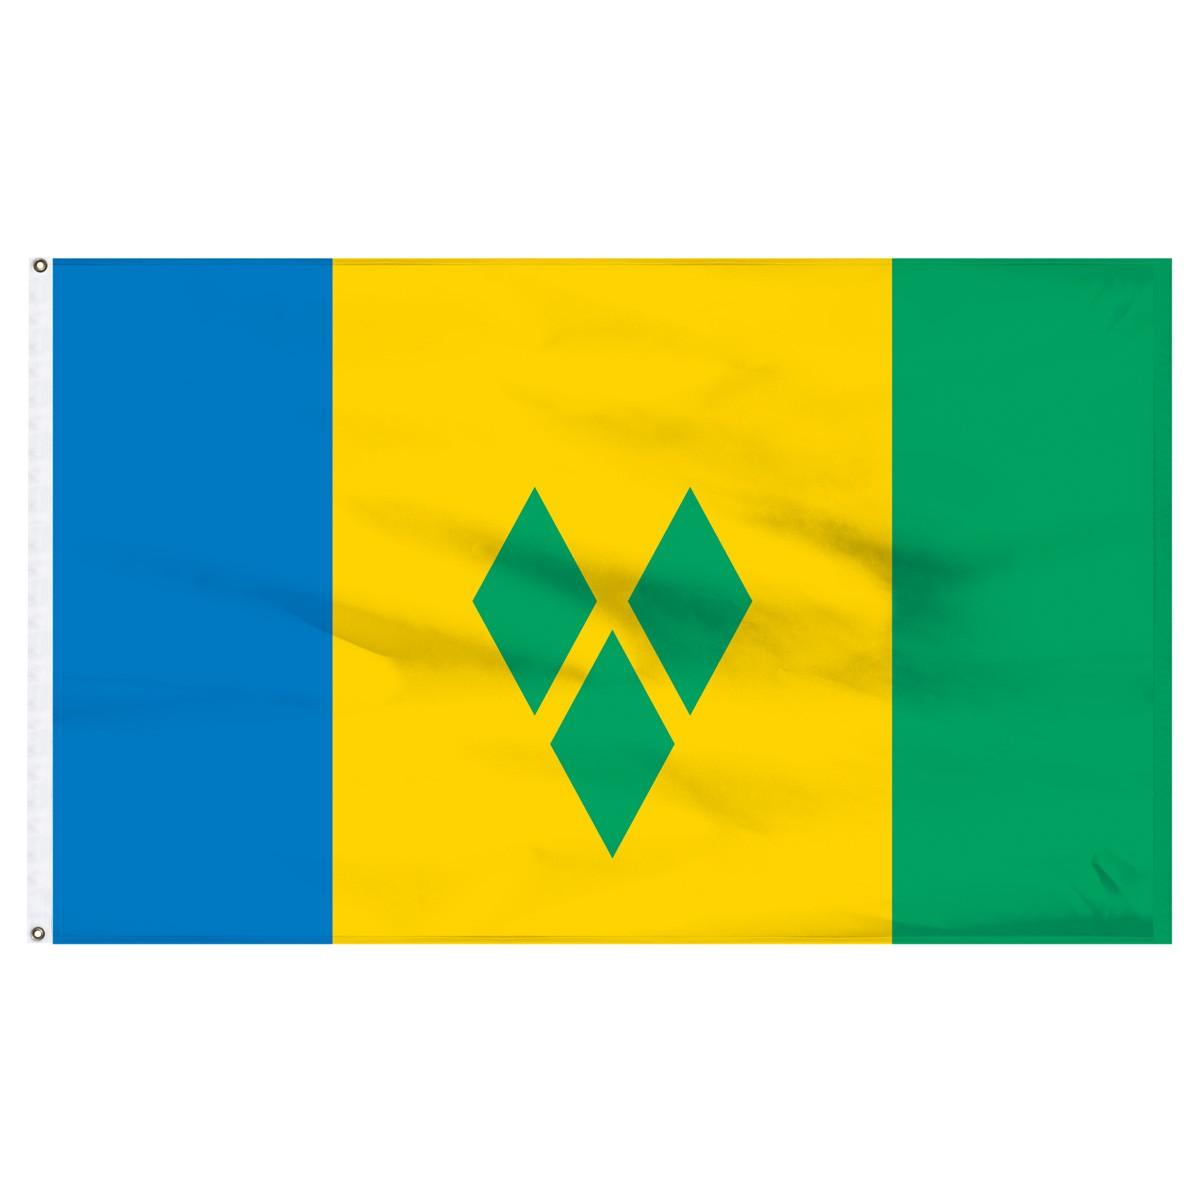 St Vincent And The Grenadines Flag Picture Of Flag Imageco.Org